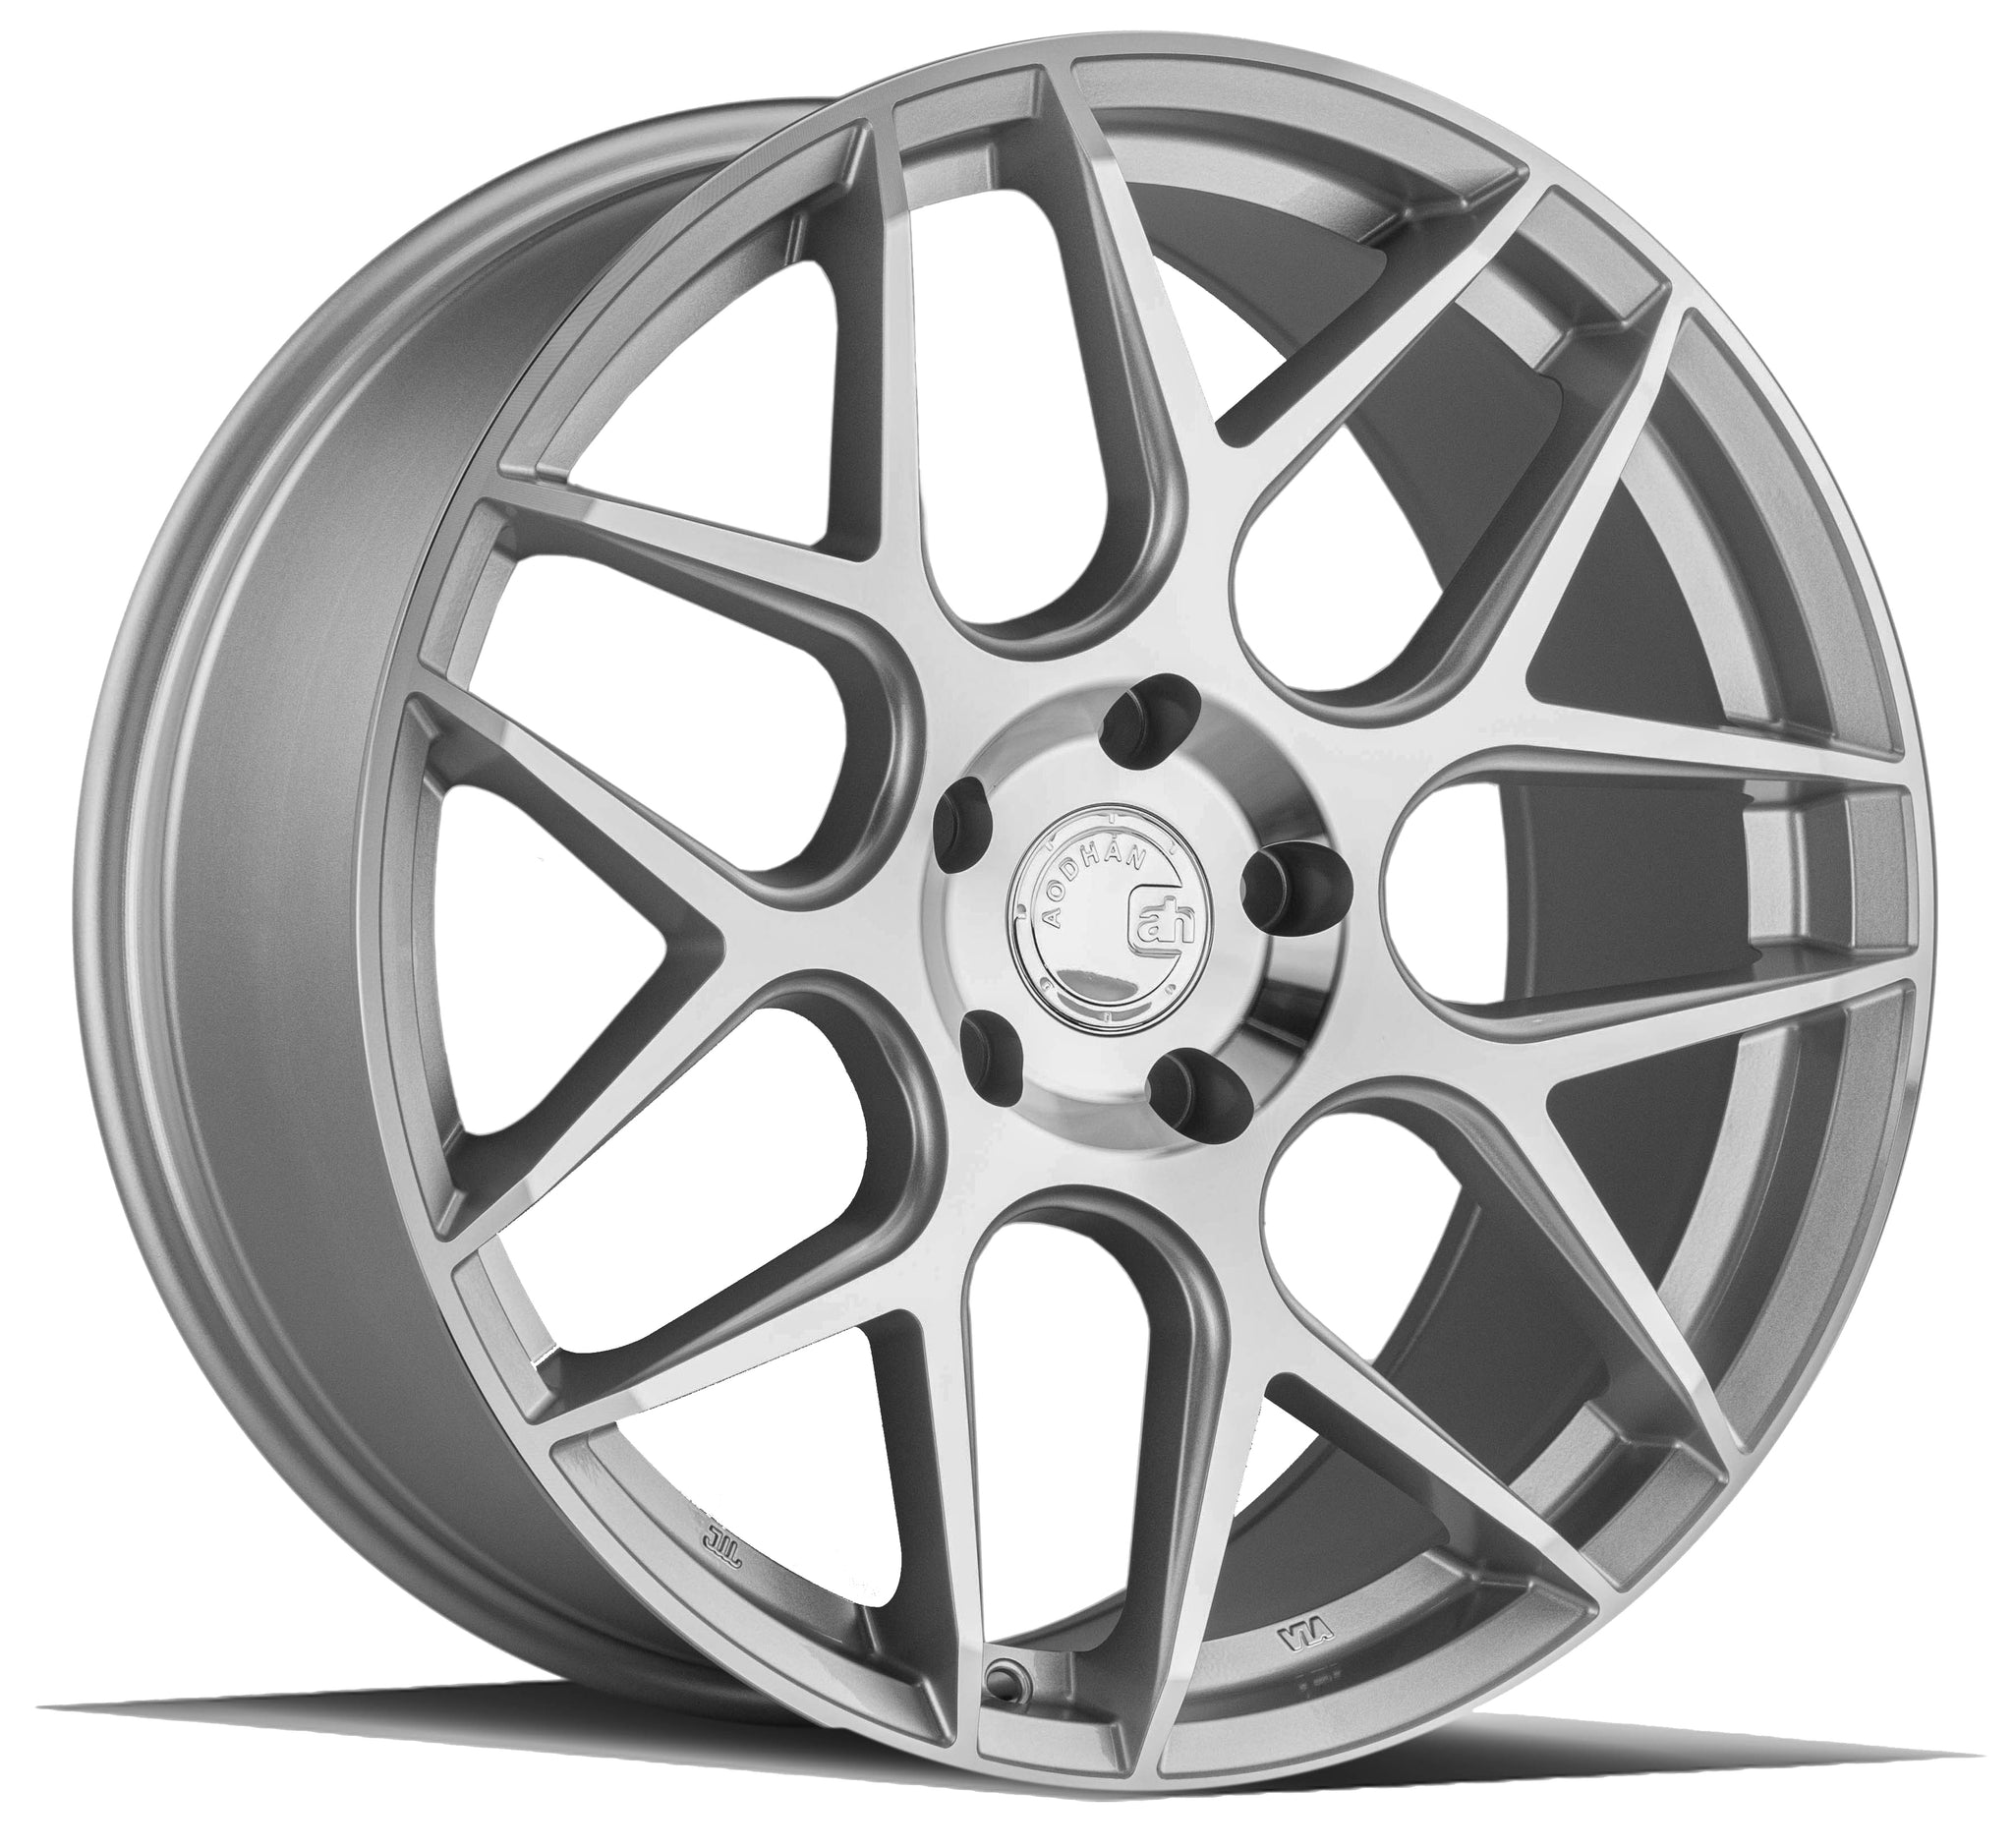 AODHAN AFF2 SILVER WITH MACHINED FACE WHEELS | 19X8.5 | 5X120 | OFFSET: 35MM | CB: 72.6MM